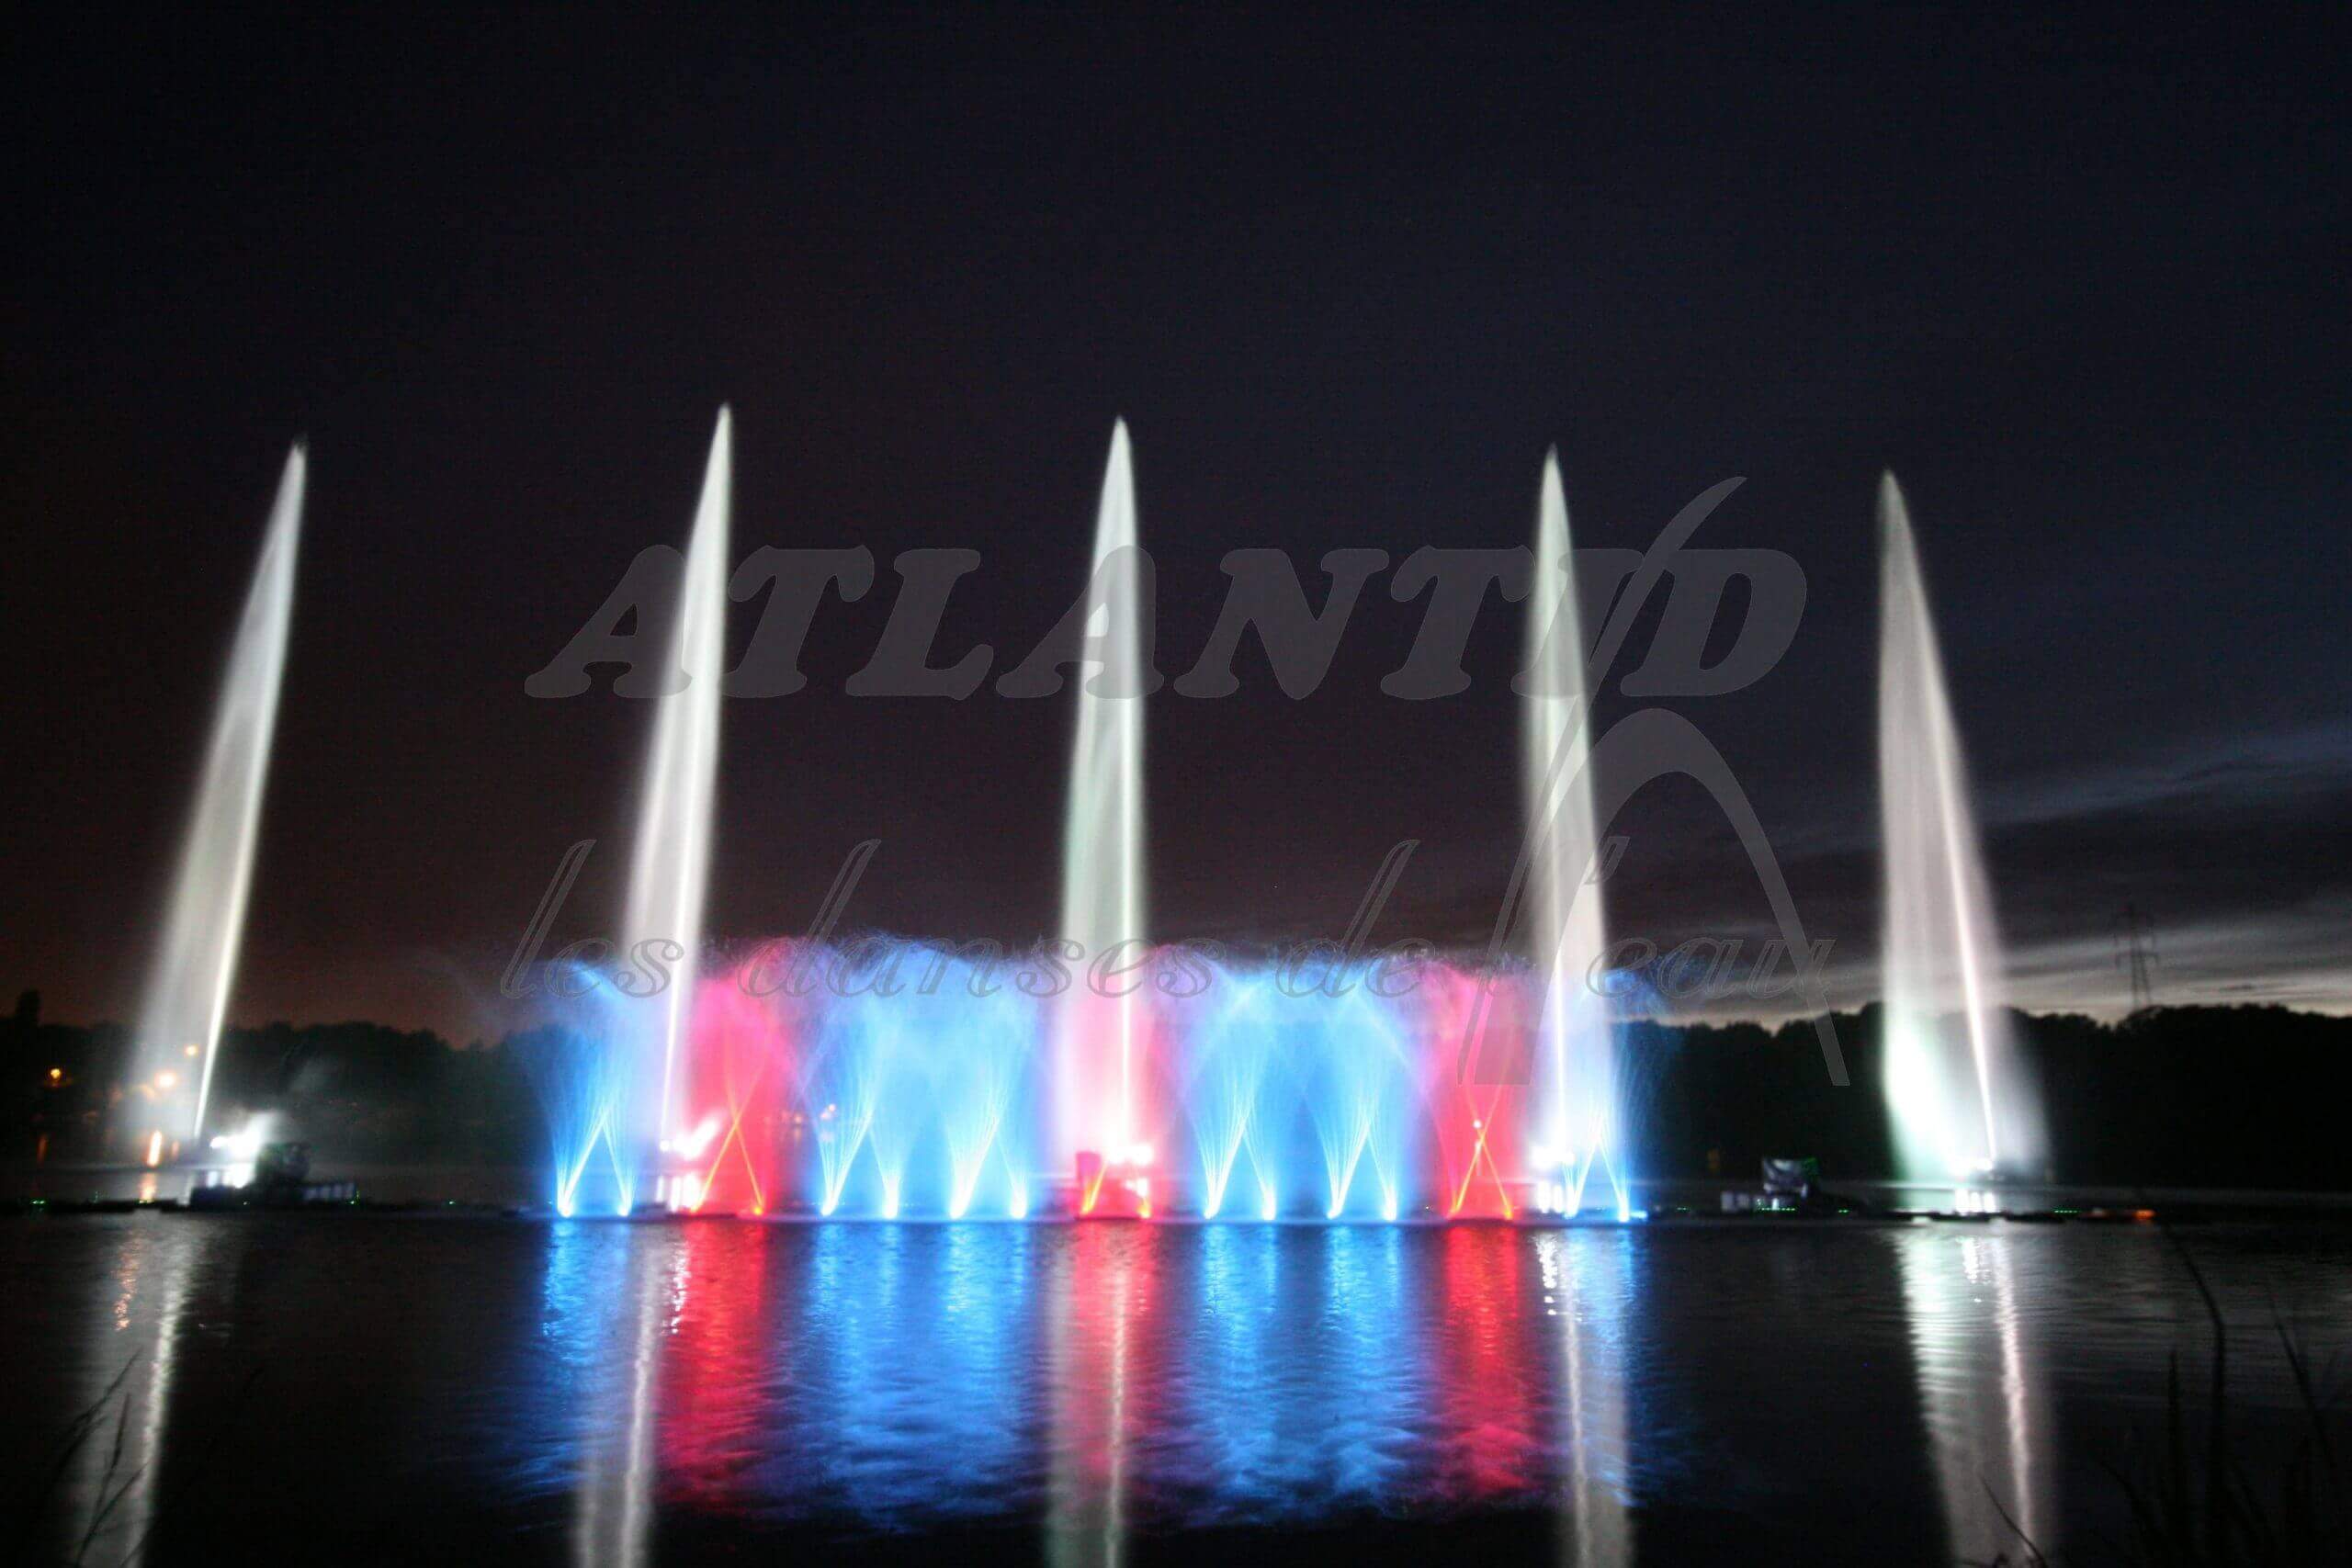 Atlantid - Photo of white, blue and red water jets